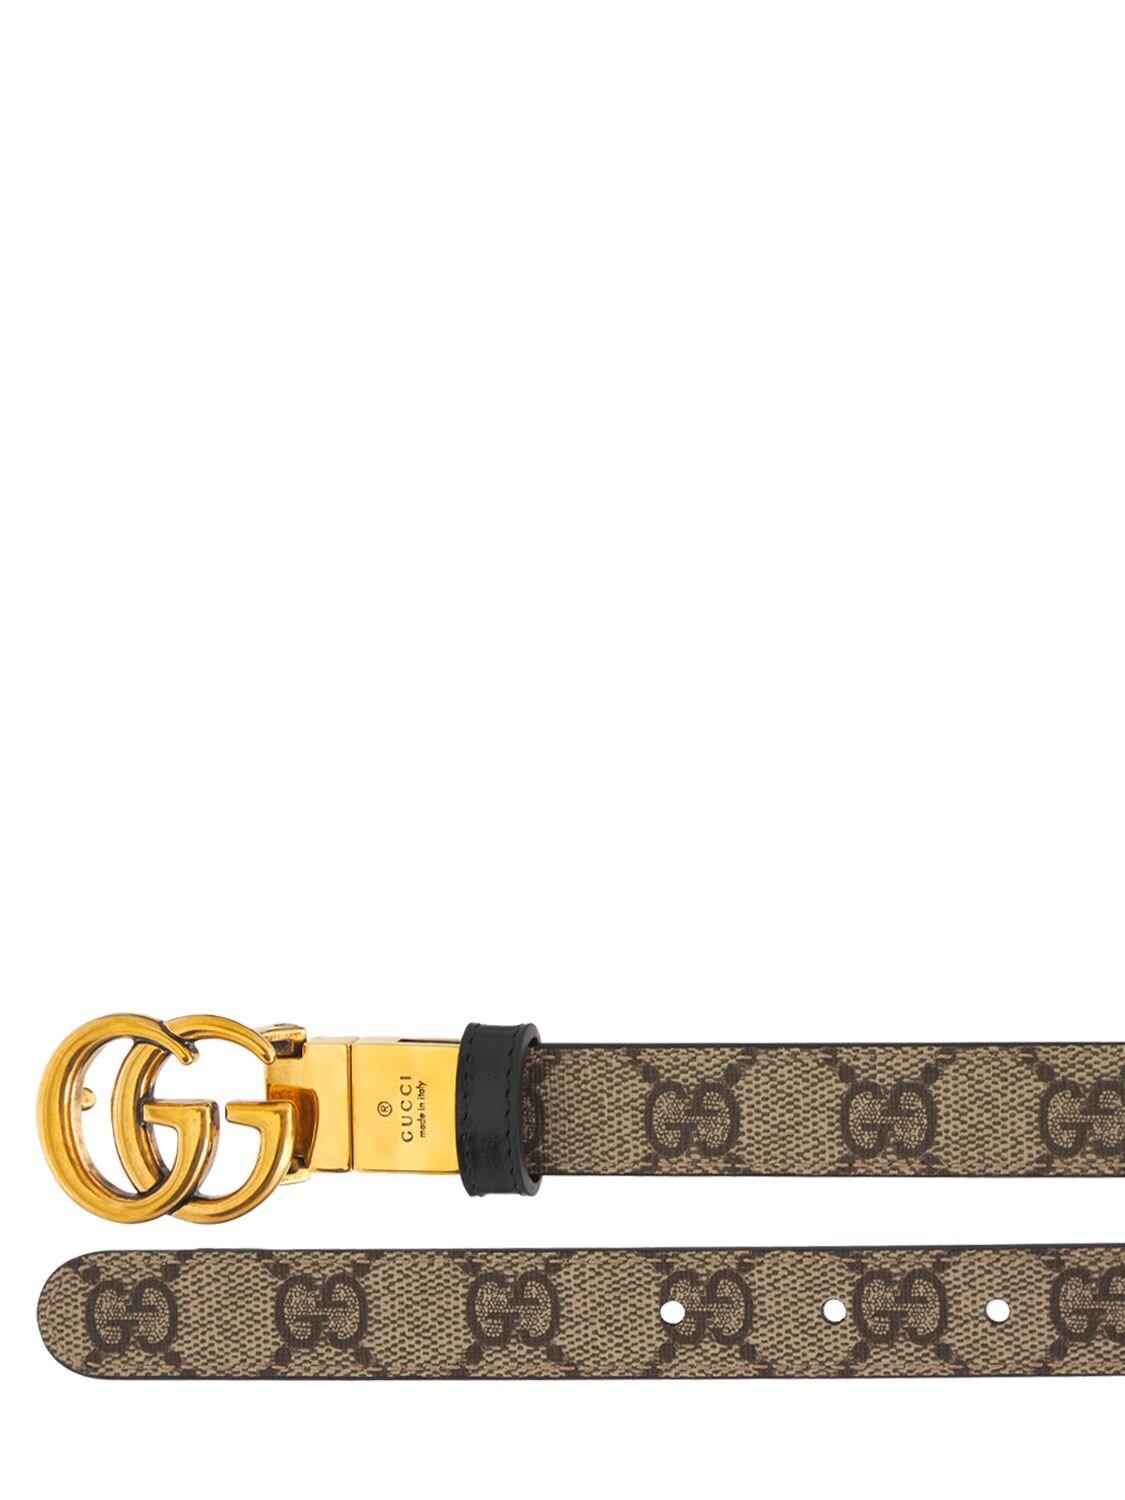 Gucci Canvas Gg Marmont Reversible Thin Leather Belt in Natural - Lyst